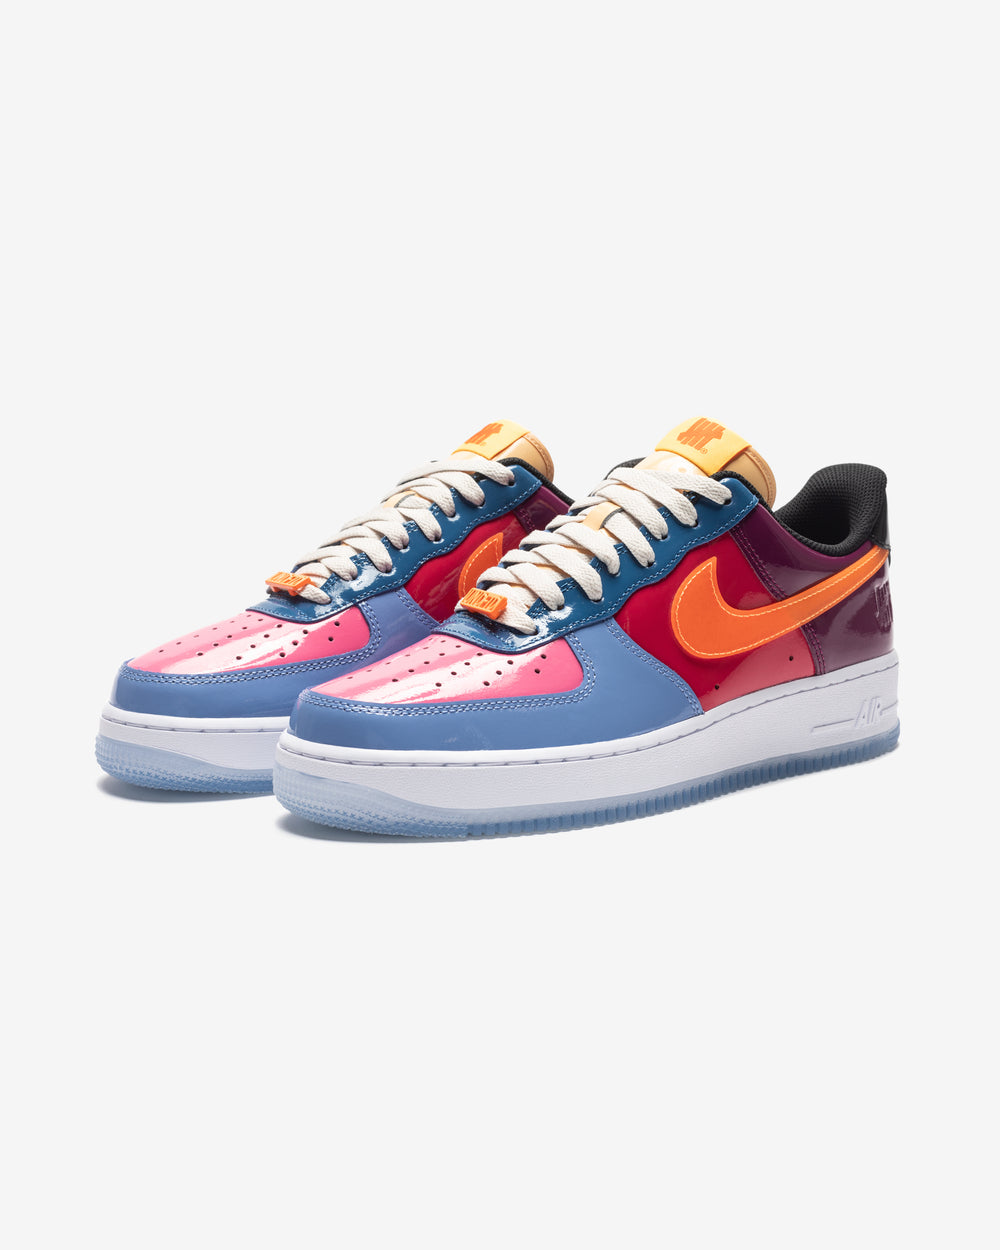 UNDEFEATED × Nike Air Force 1 Low